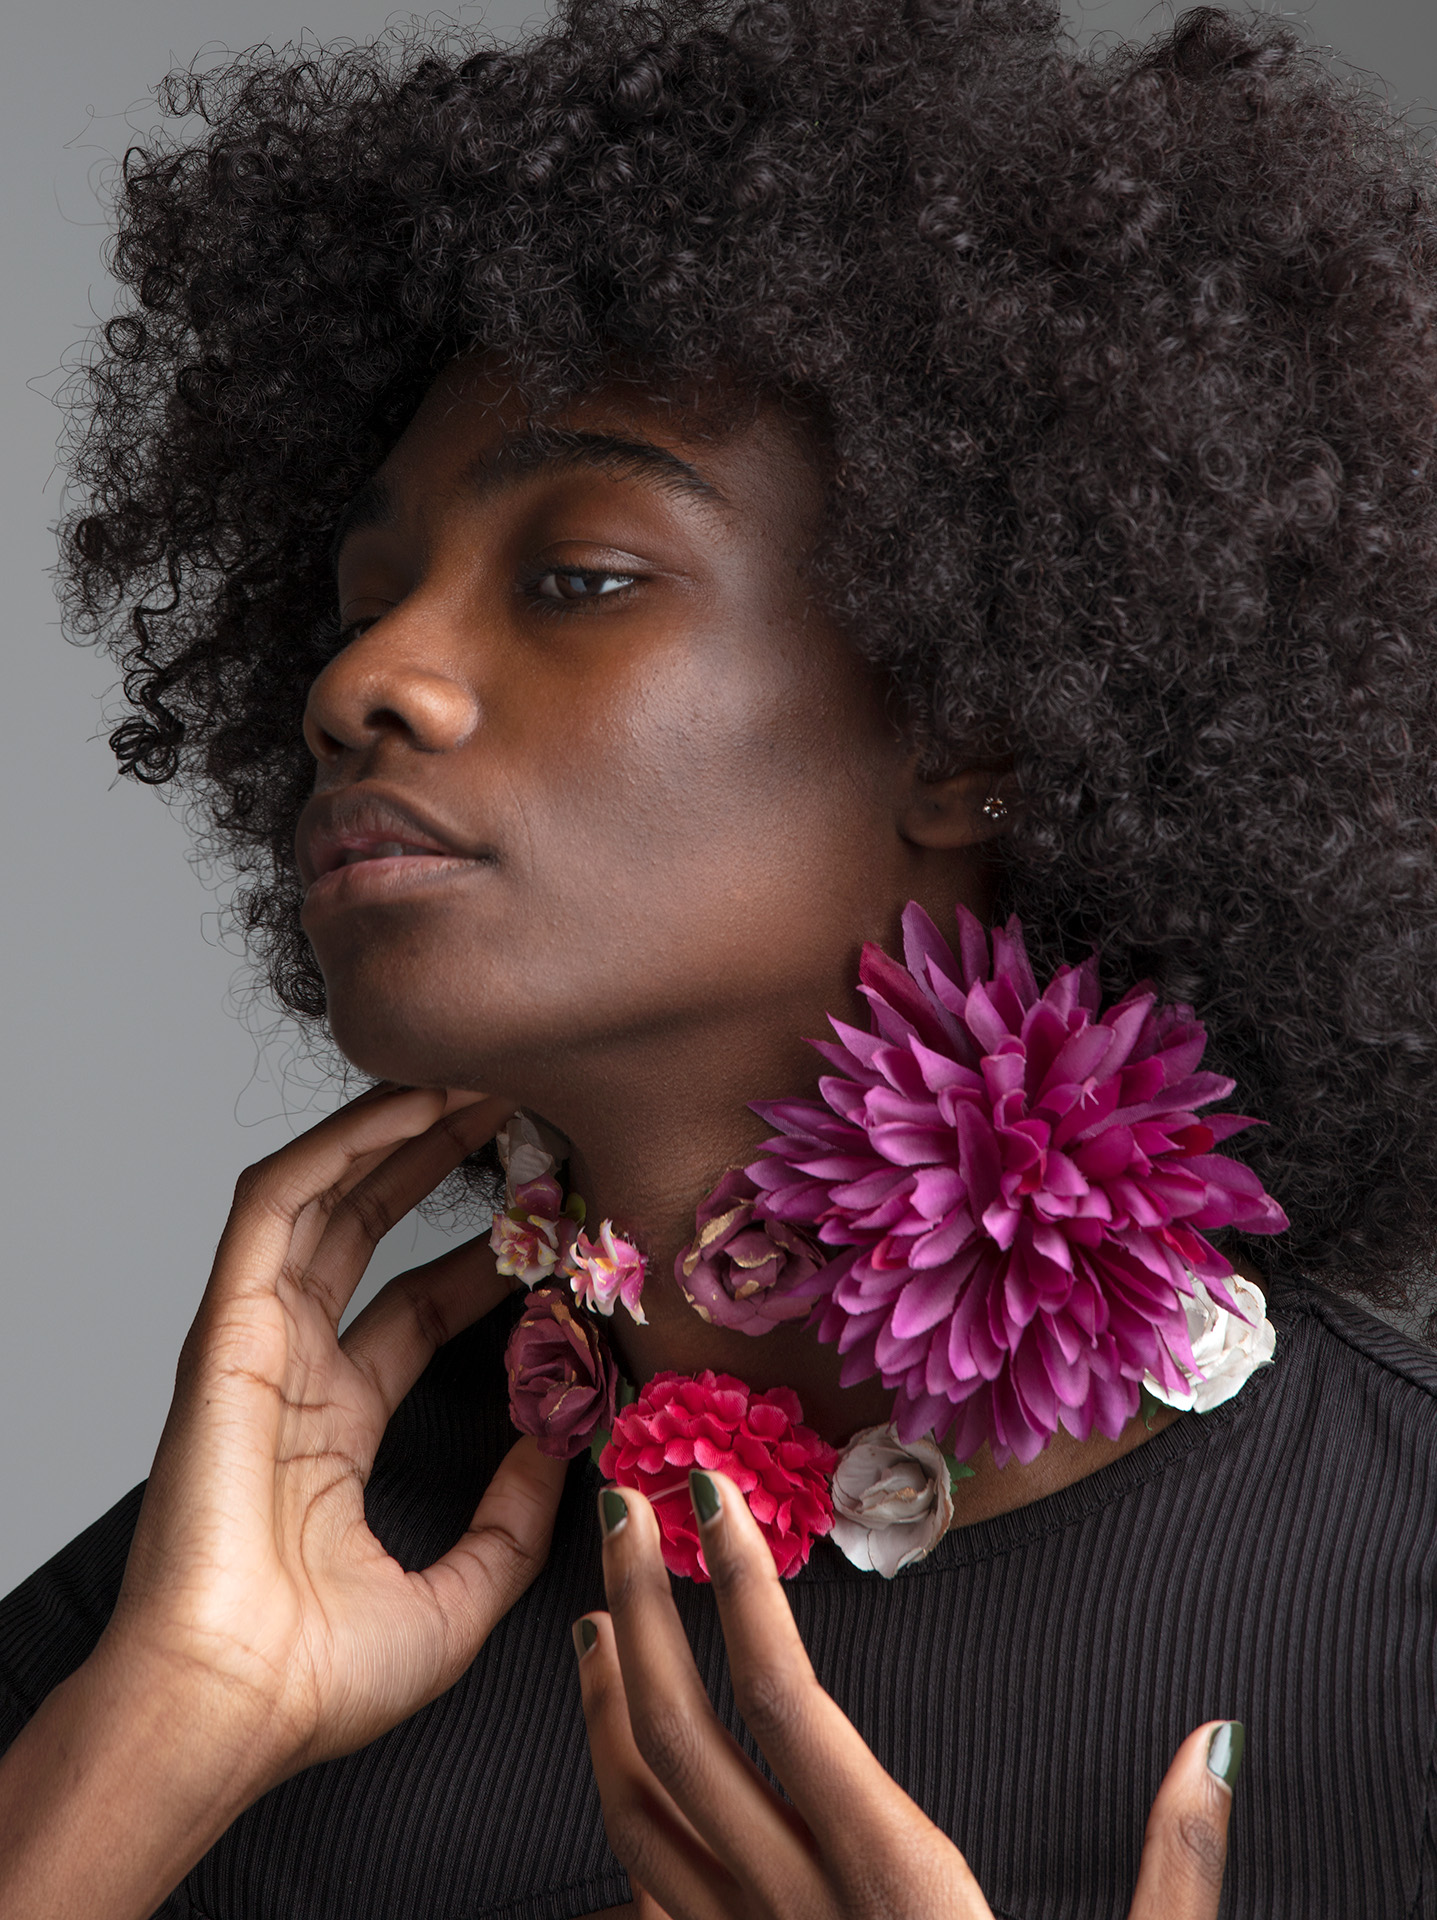 Black woman, with her hair styled in an afro, her left hand is softly touching the side of her neck, her right hand is in front of her. Her gaze is cast downwards. She is wearing a black shirt. Eight flowers of different sizes and species grow on her neck in colours ranging from pink, white, burgundy and purple.